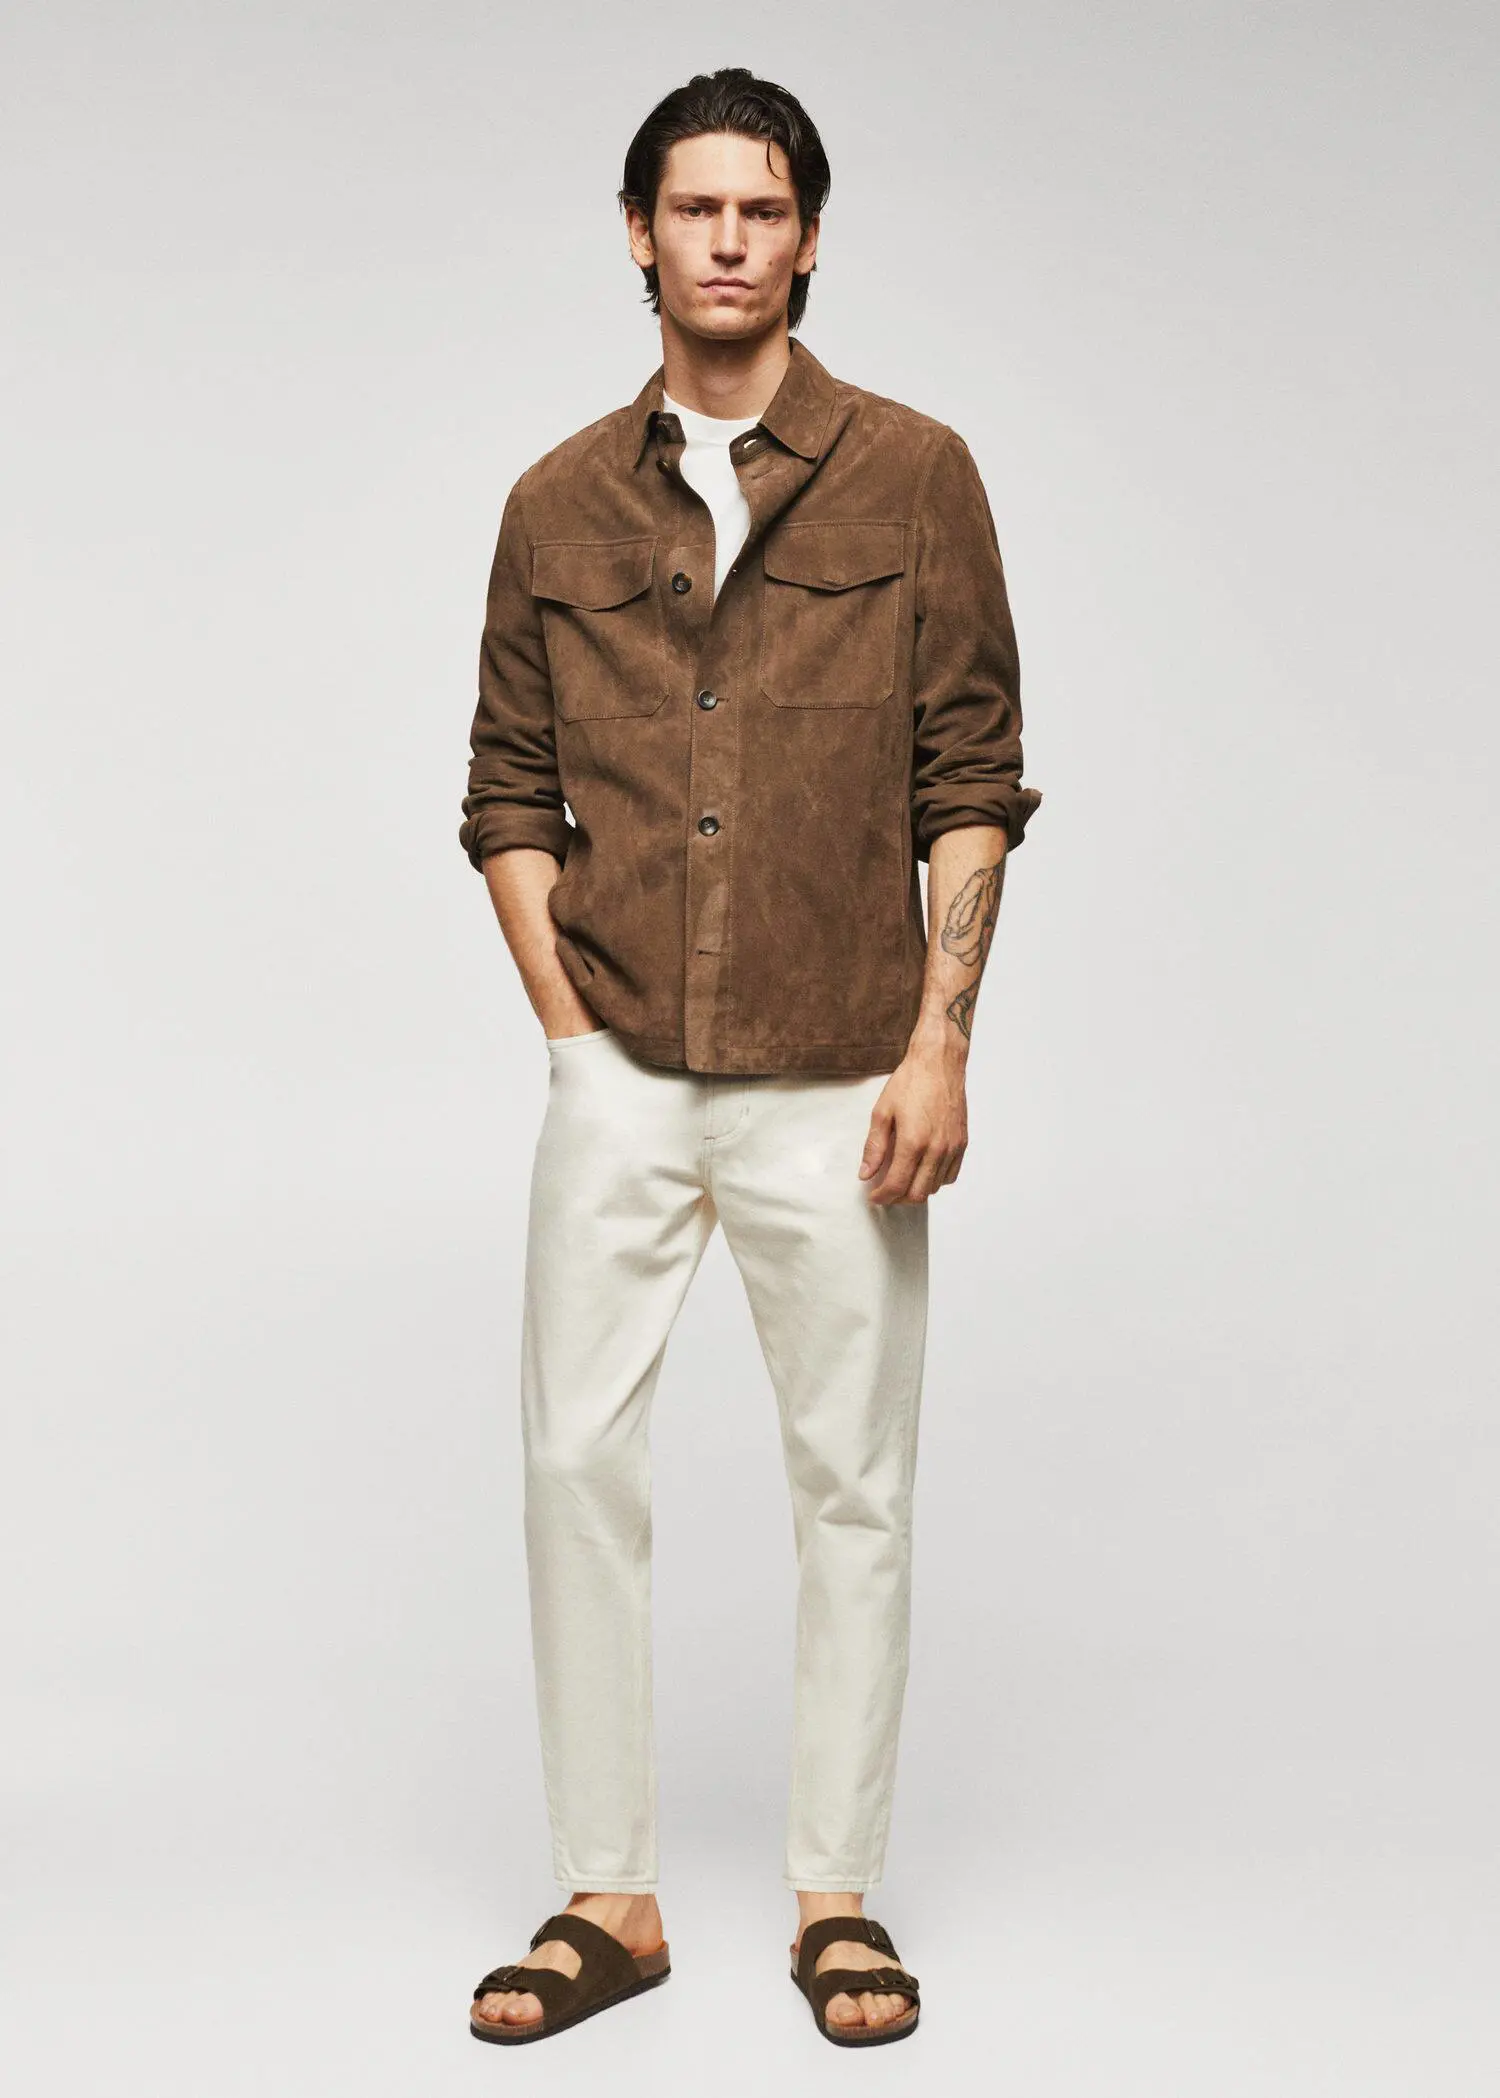 Mango 100% suede leather jacket. a man wearing a brown jacket and white pants. 